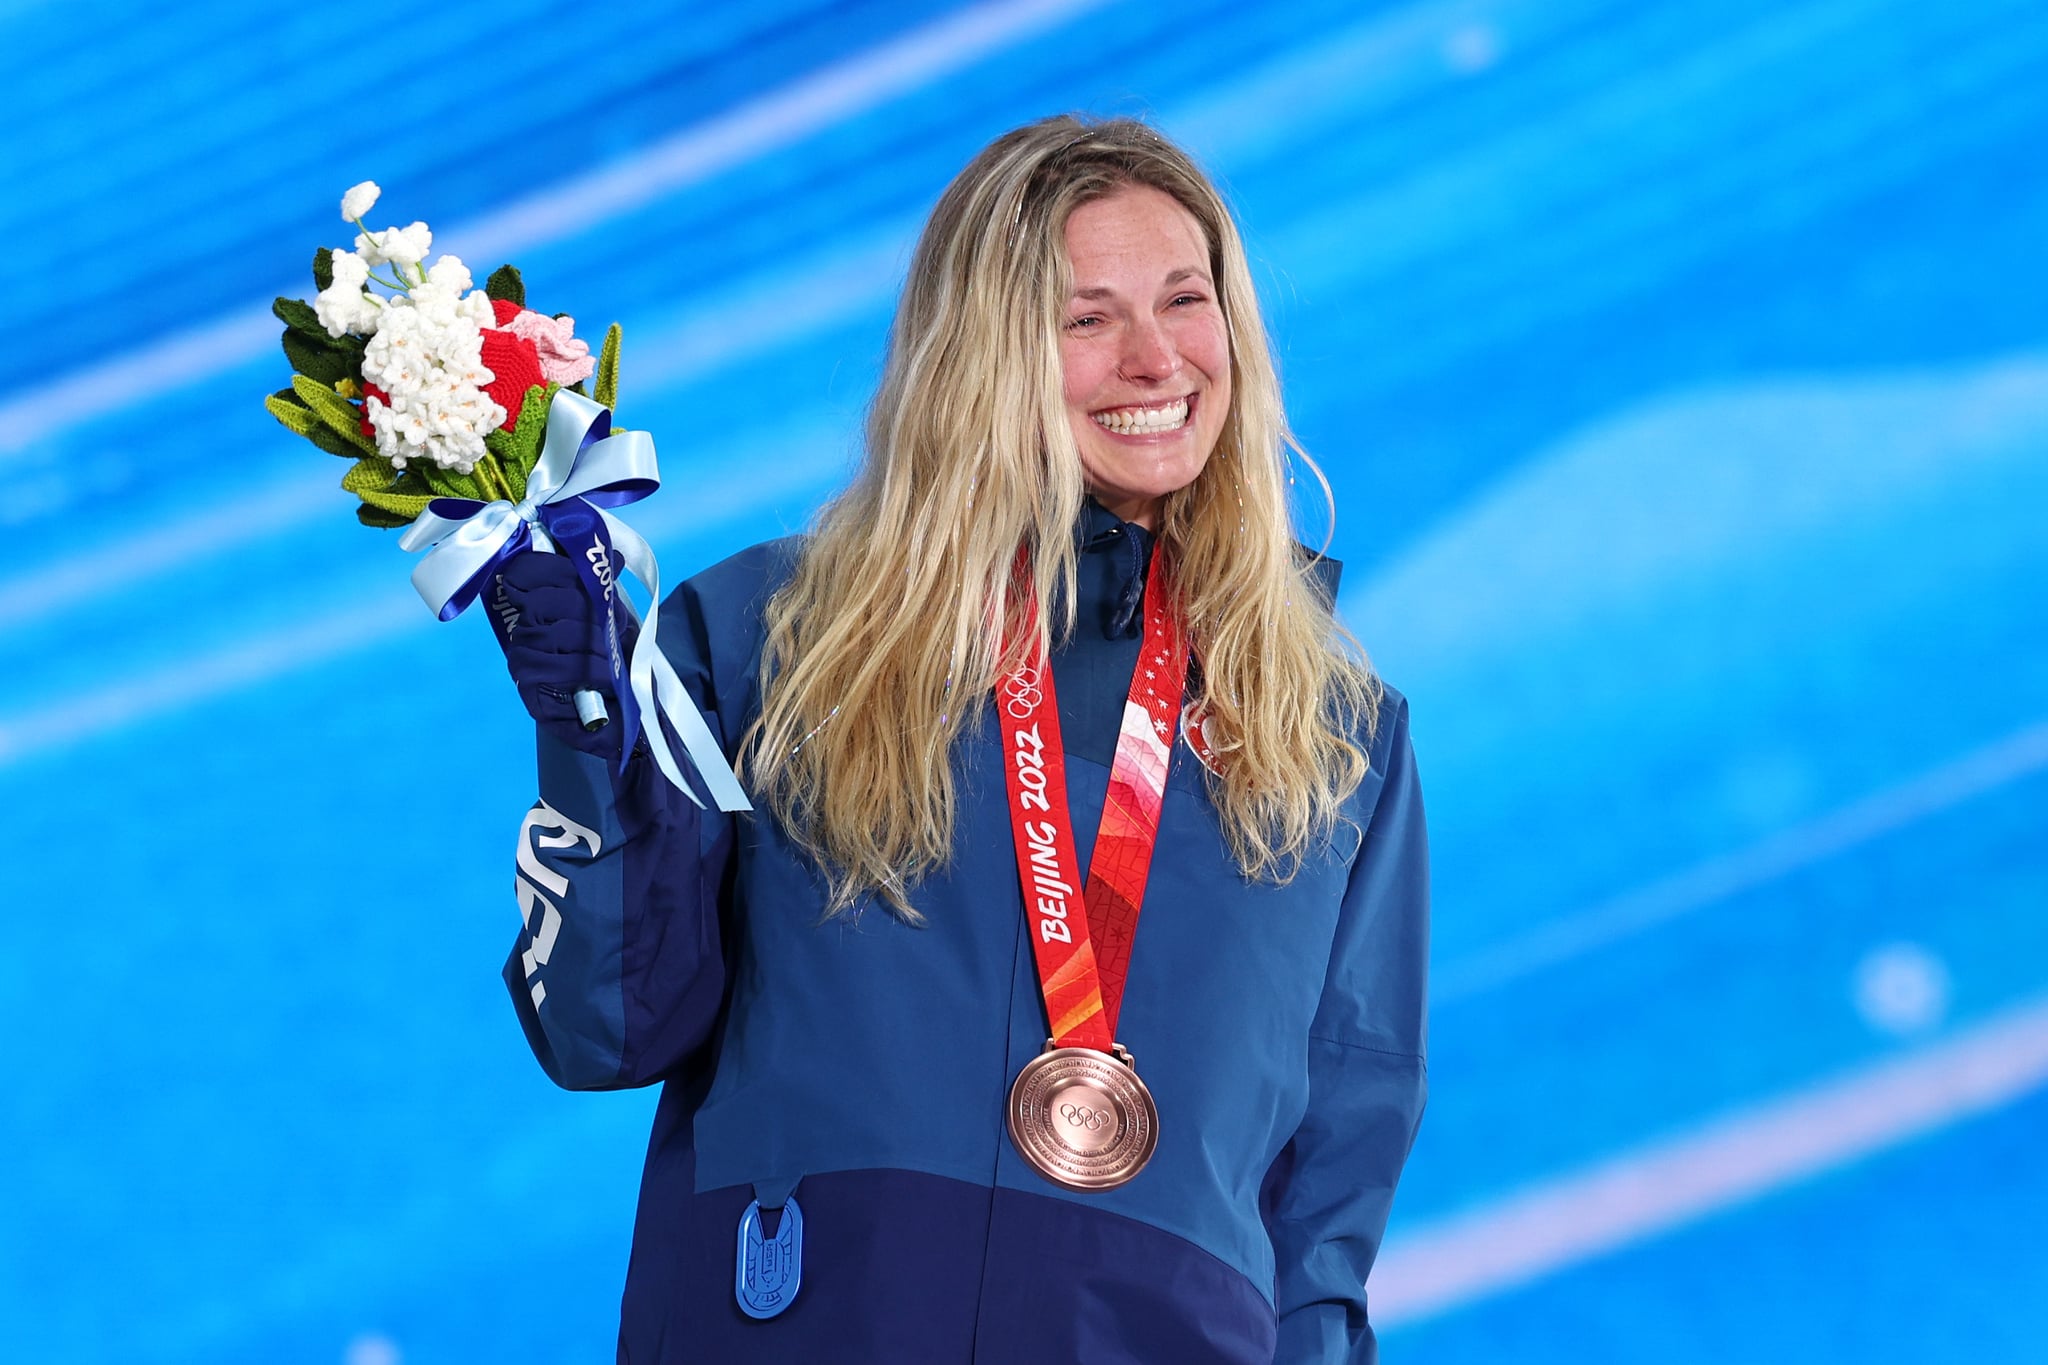 ZHANGJIAKOU, CHINA - FEBRUARY 09: Bronze medallist, Jessie Diggins of Team United States celebrates on the podium during the Women's Cross-Country Sprint Free medal ceremony on Day 5 of the Beijing 2022 Winter Olympic Games at Zhangjiakou Medal Plaza on February 09, 2022 in Zhangjiakou, China. (Photo by Patrick Smith/Getty Images)